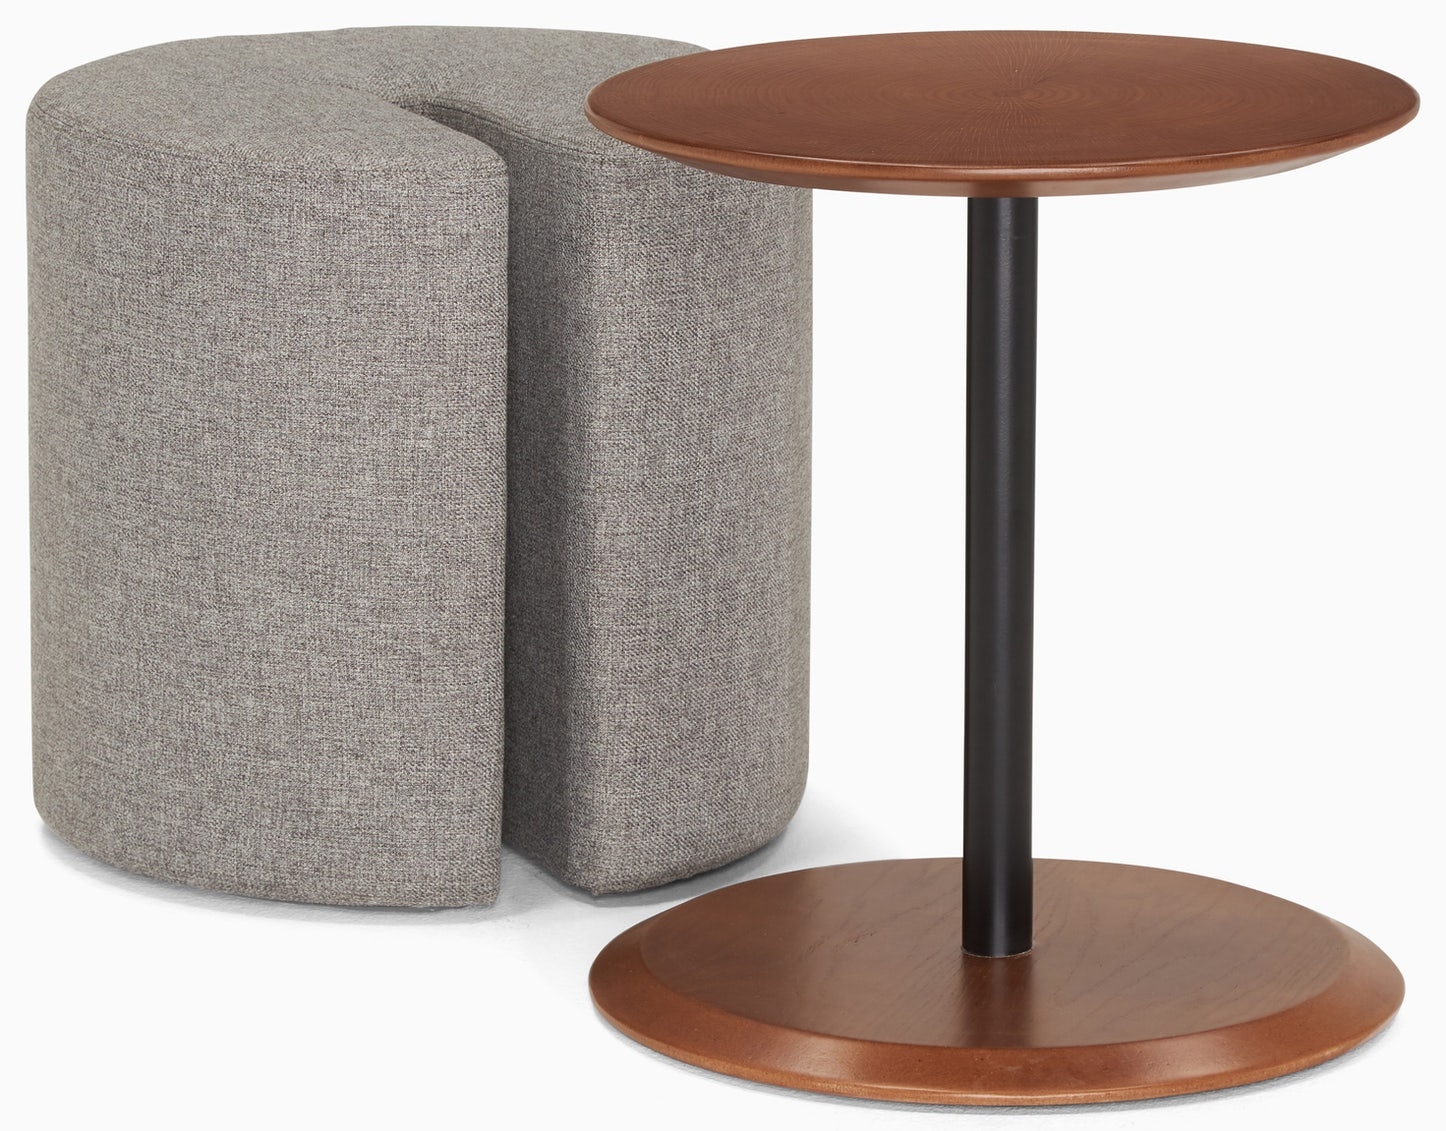 Darby Side Table - Image 2